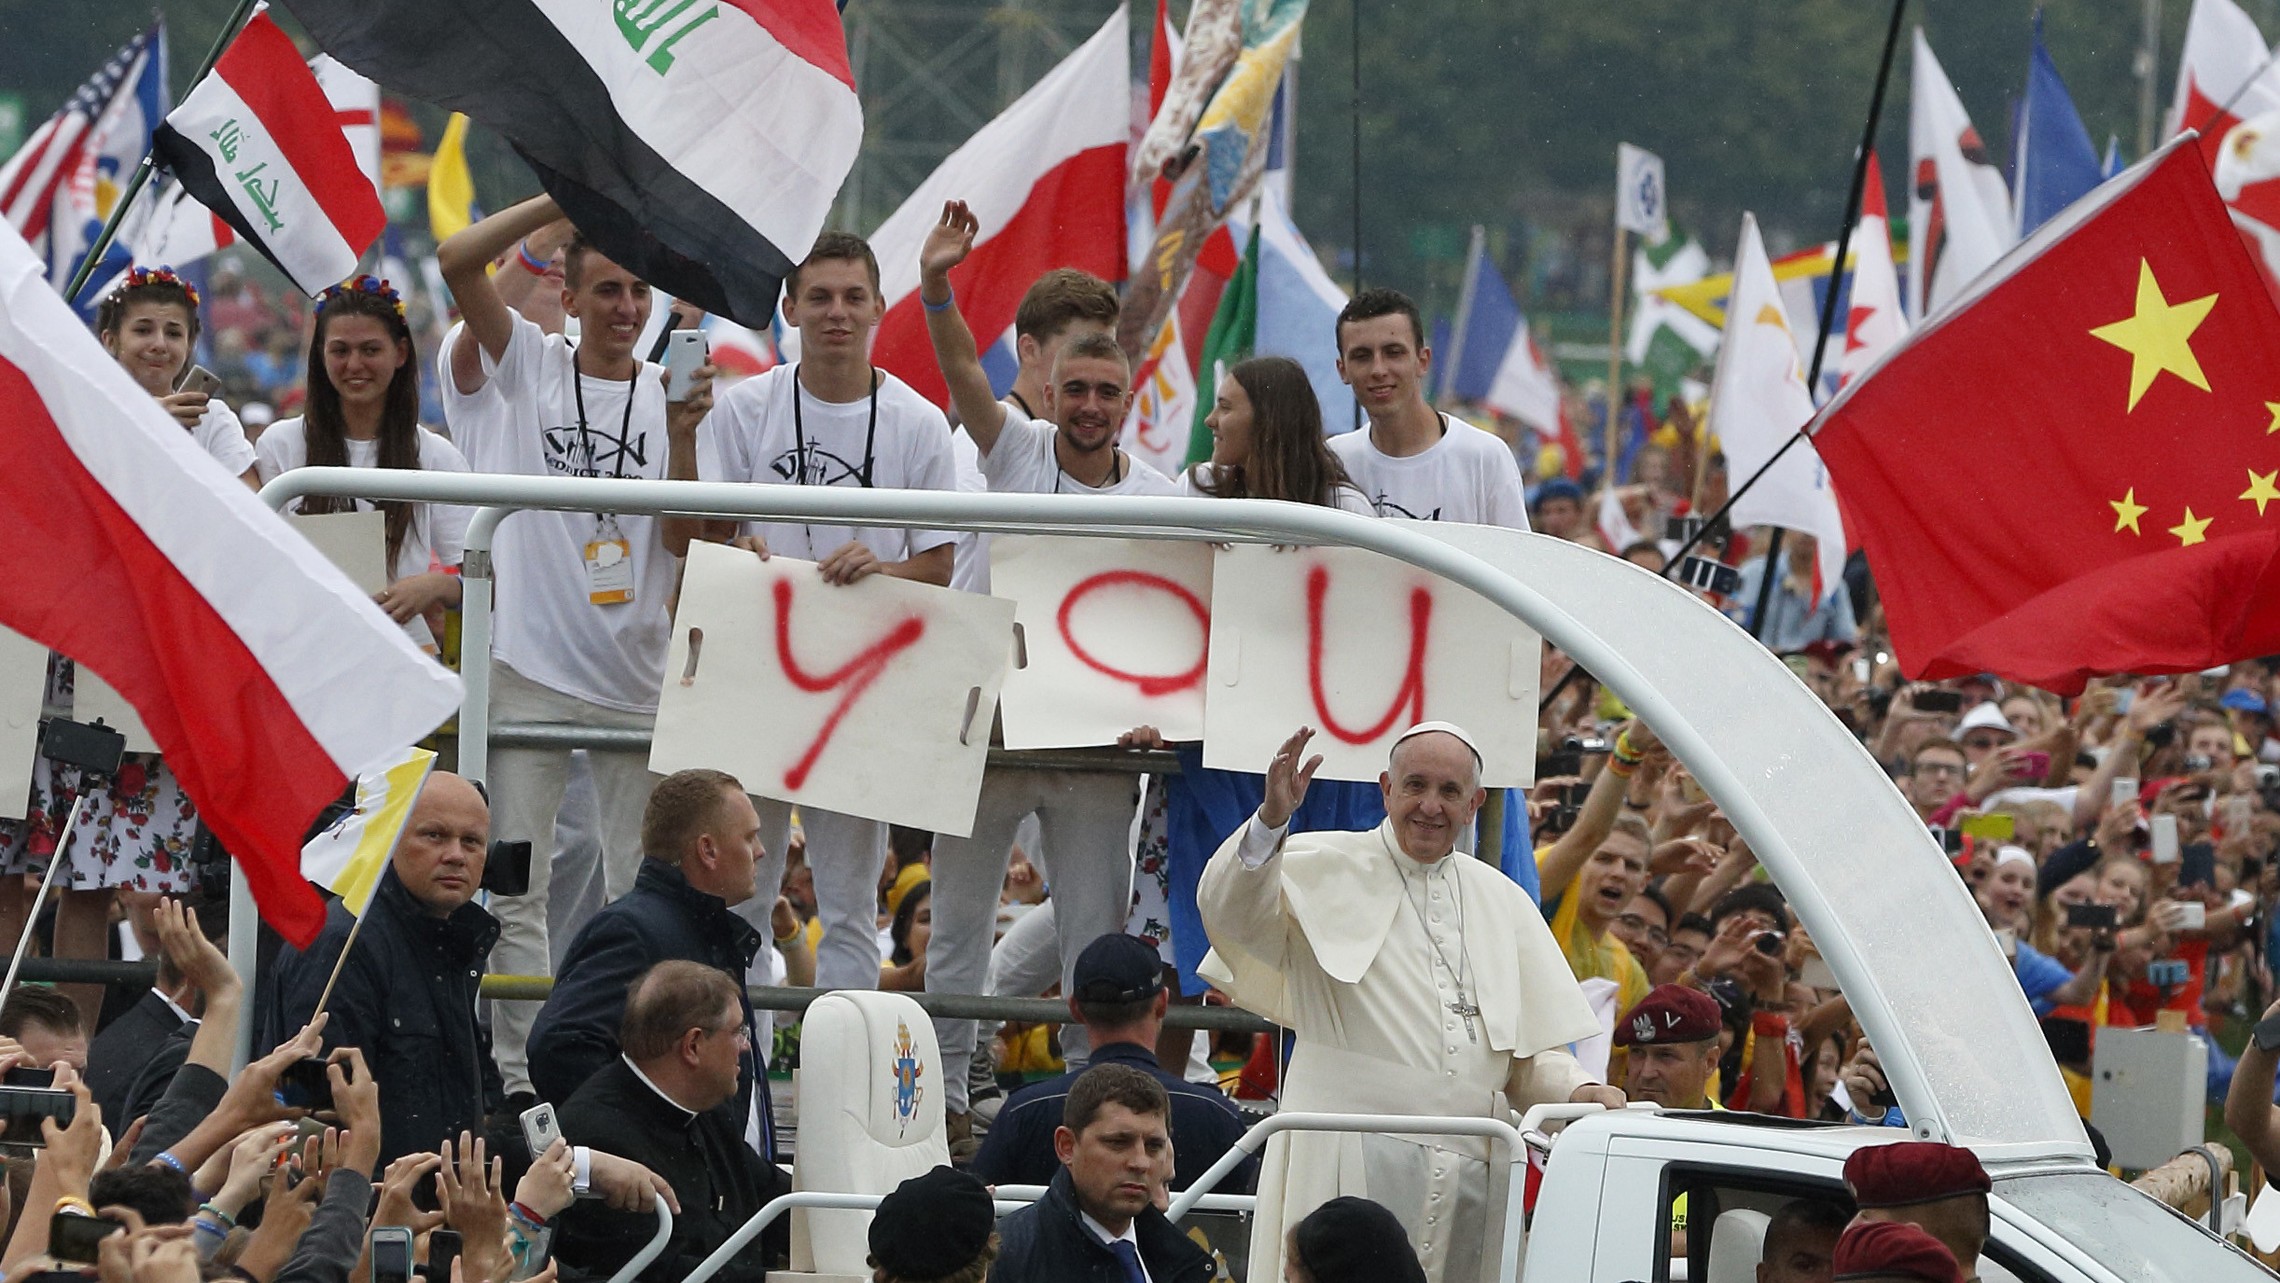 20160728t1438 0778 Cns Pope Poland Wyd Welcome